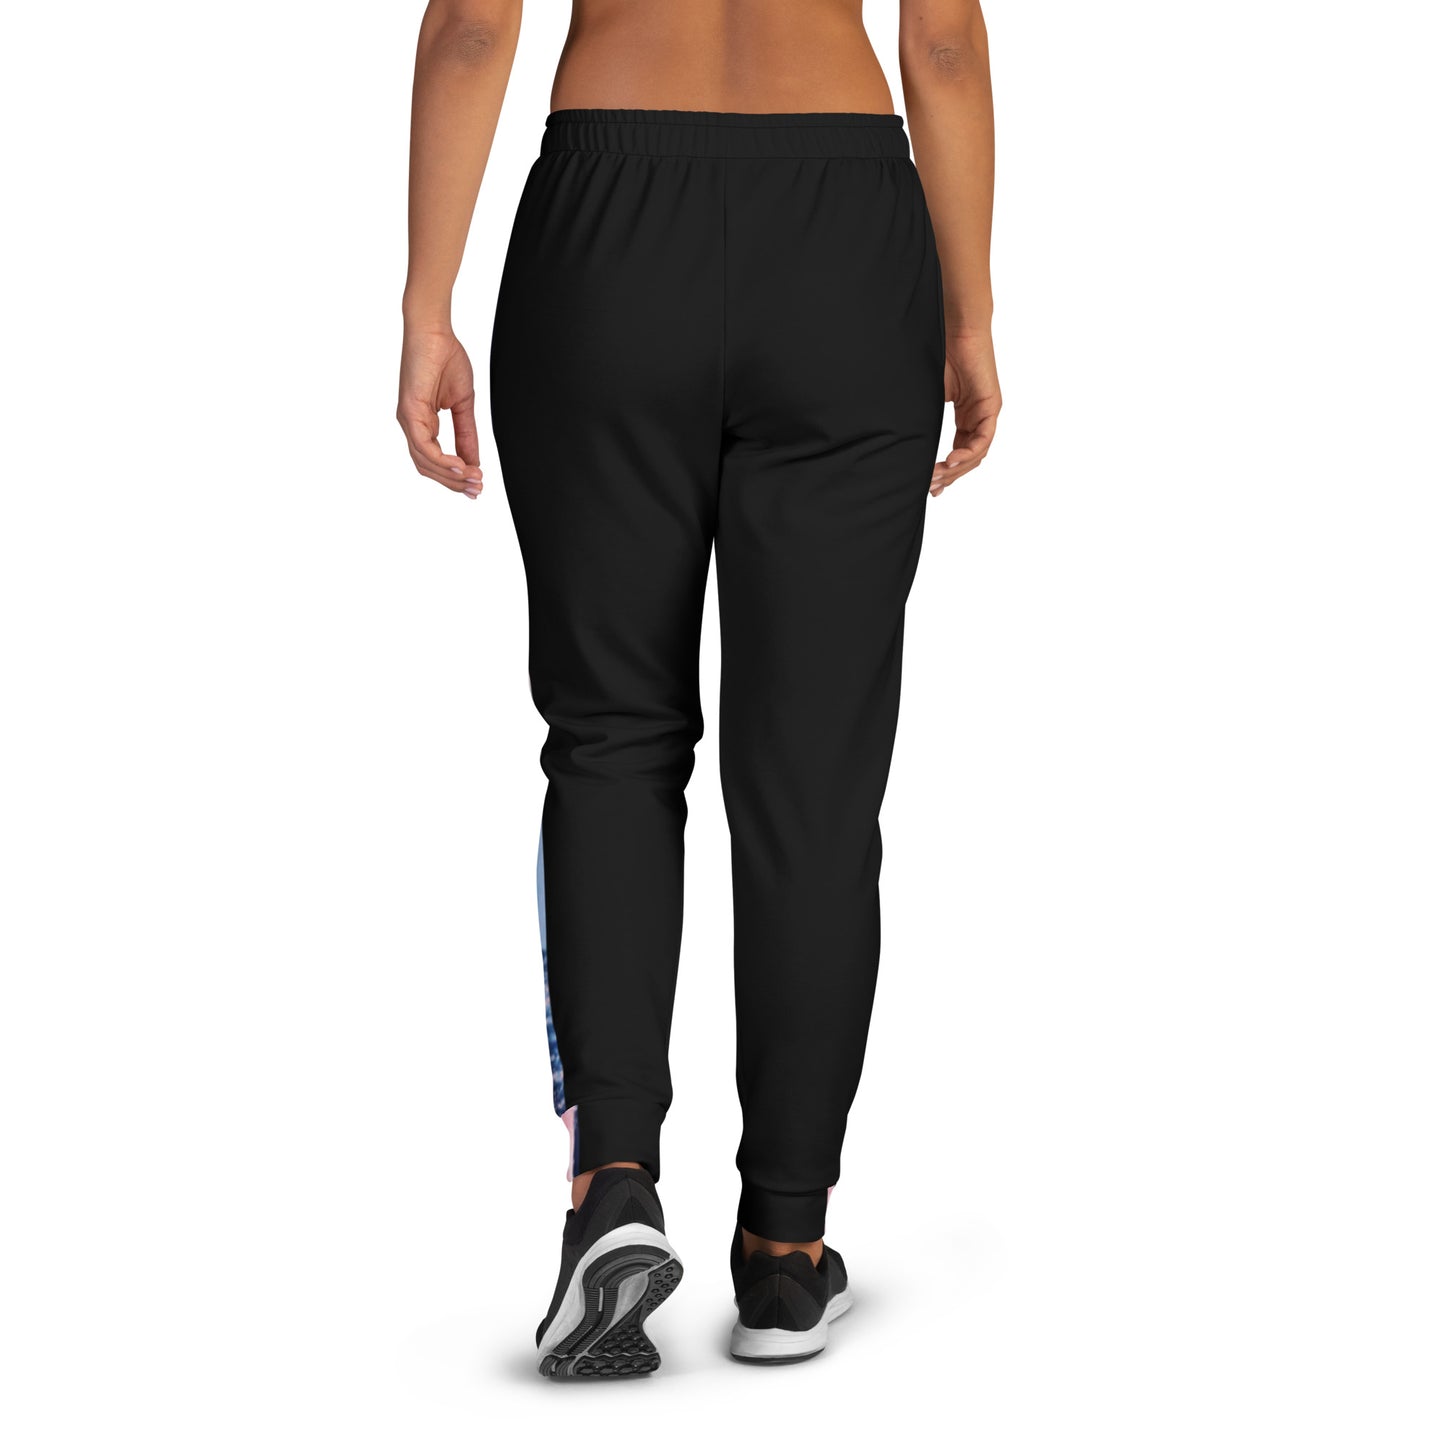 Women's Fitgo Fortitude Joggers